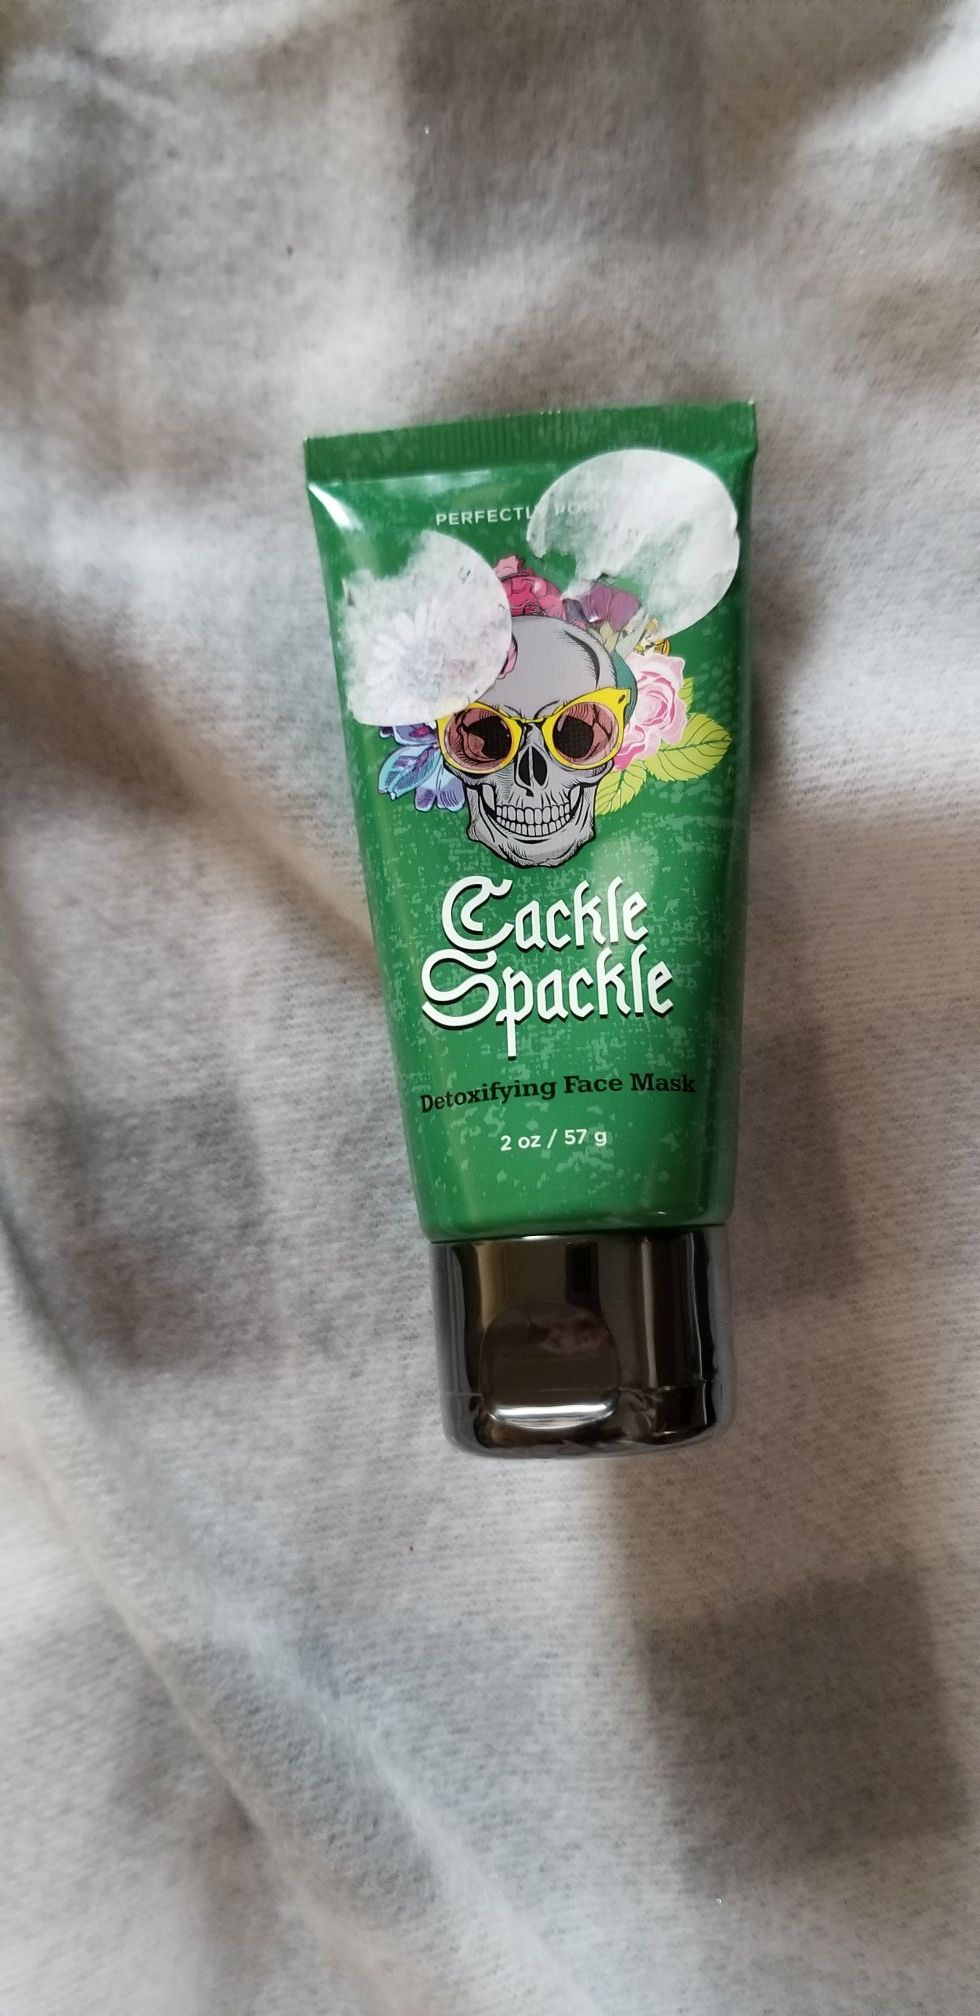 Perfectly Posh Cackle Spackle Face MASK